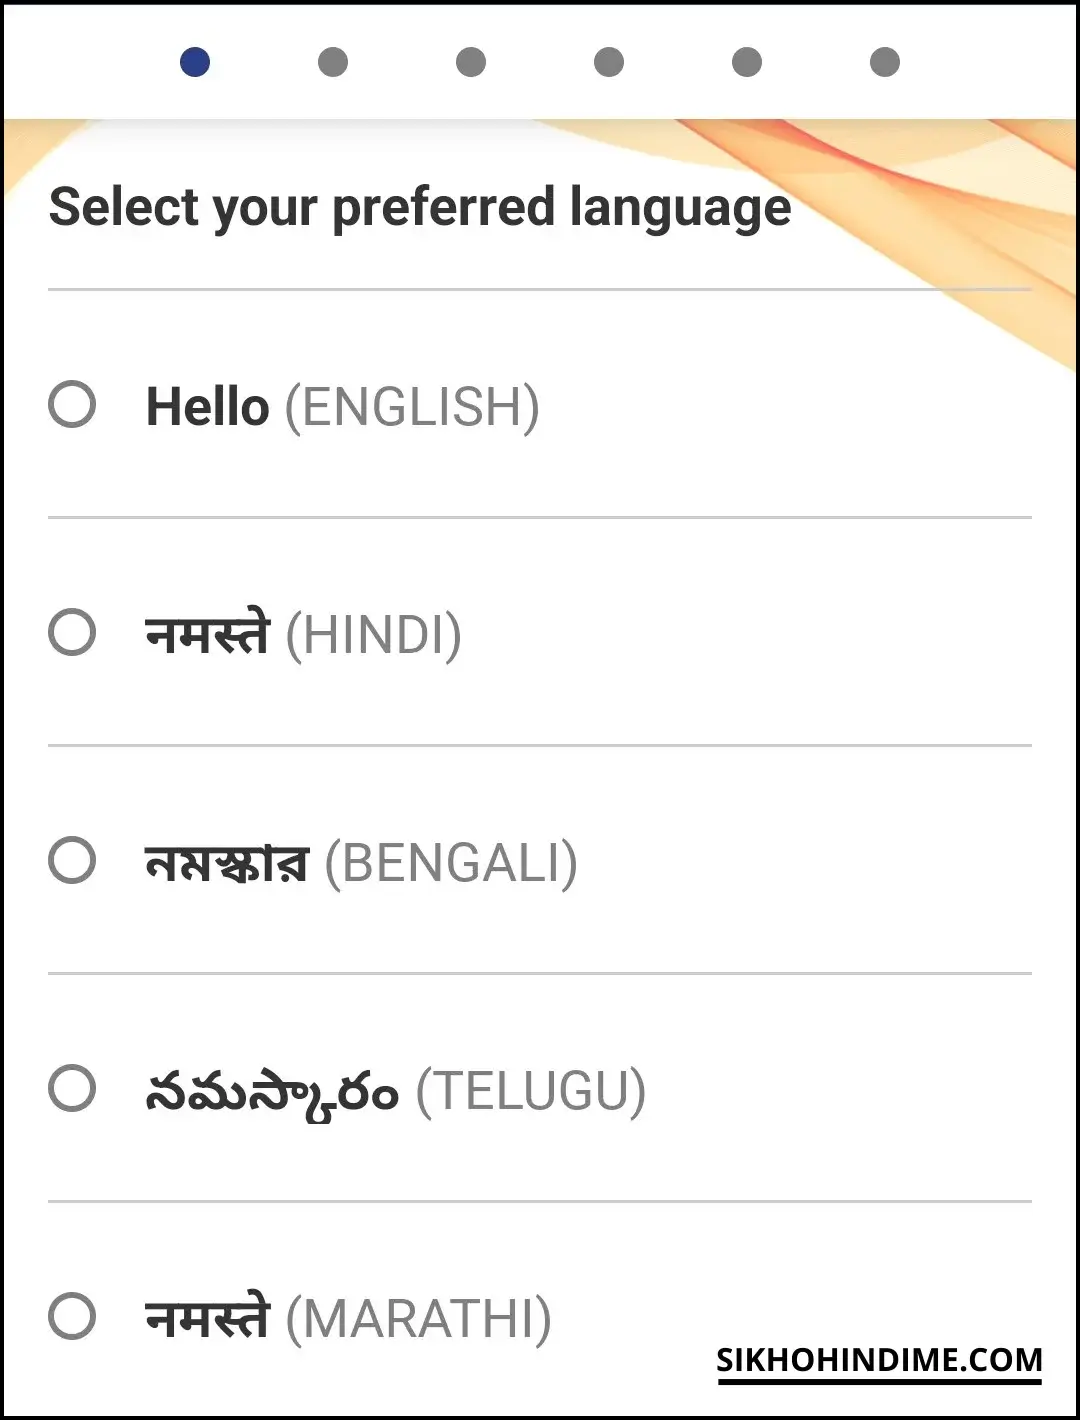 Select your preferred language